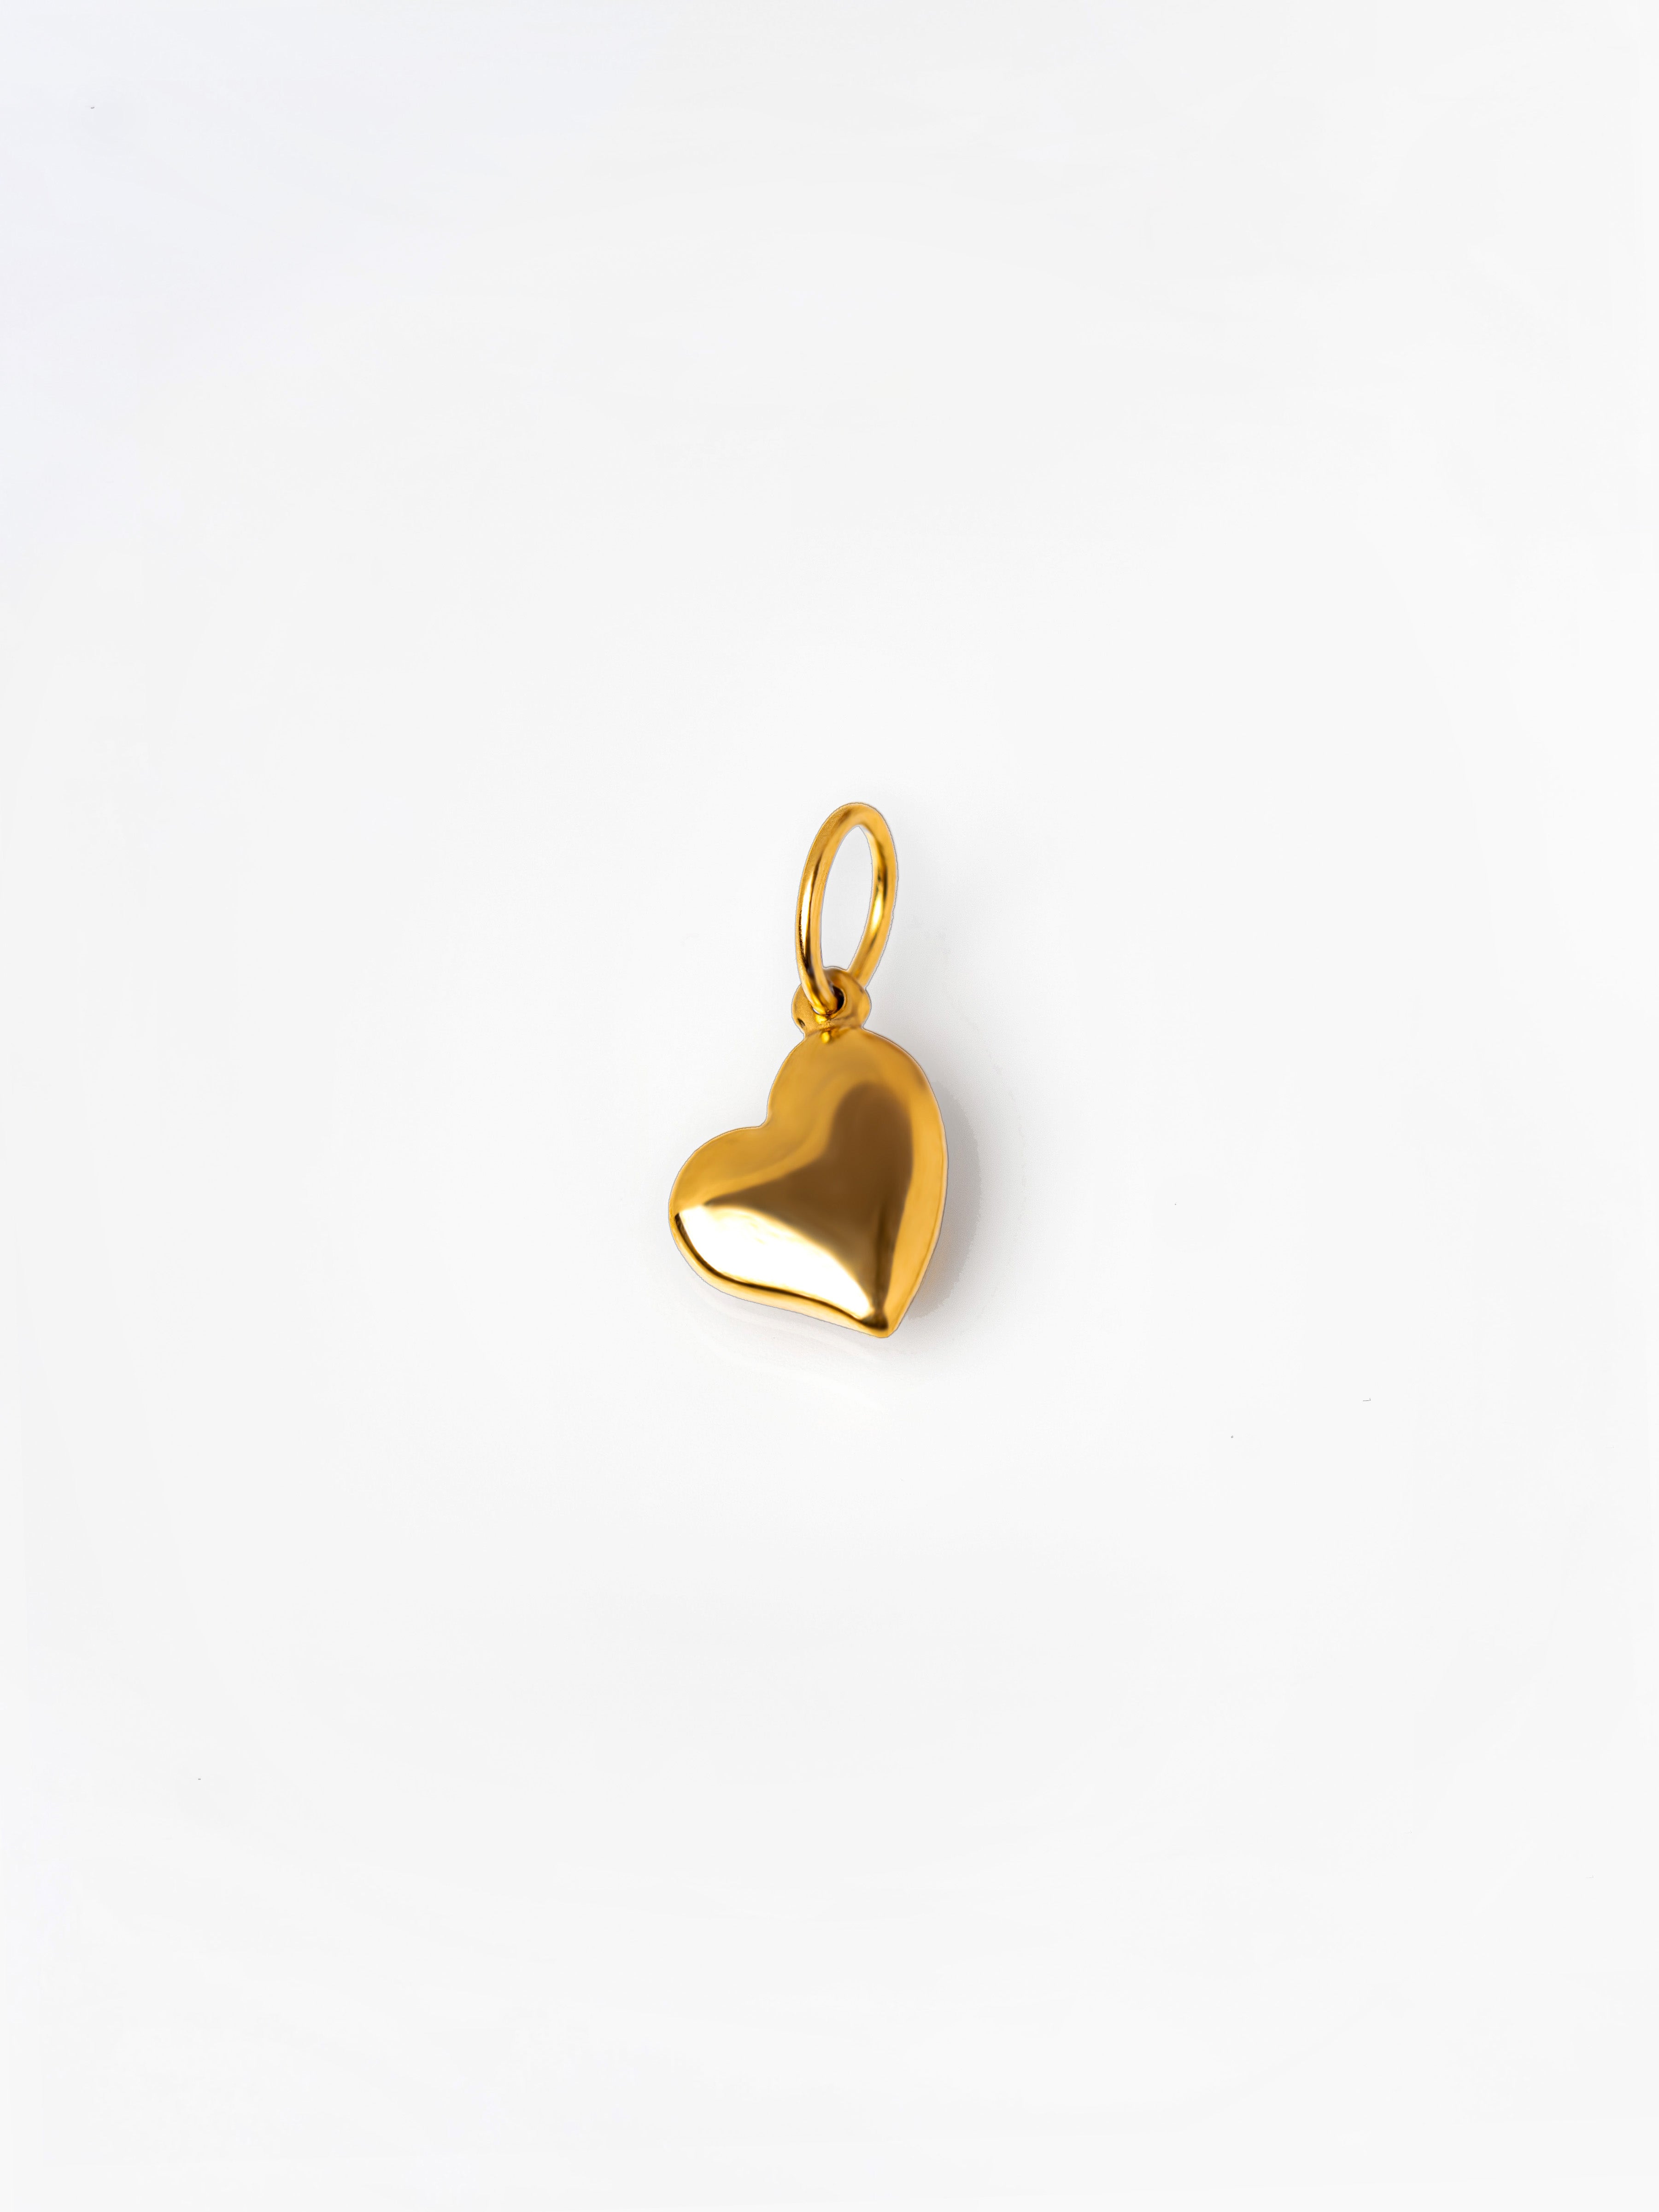 Gold Tiny Solid Heart Pendant / Charm